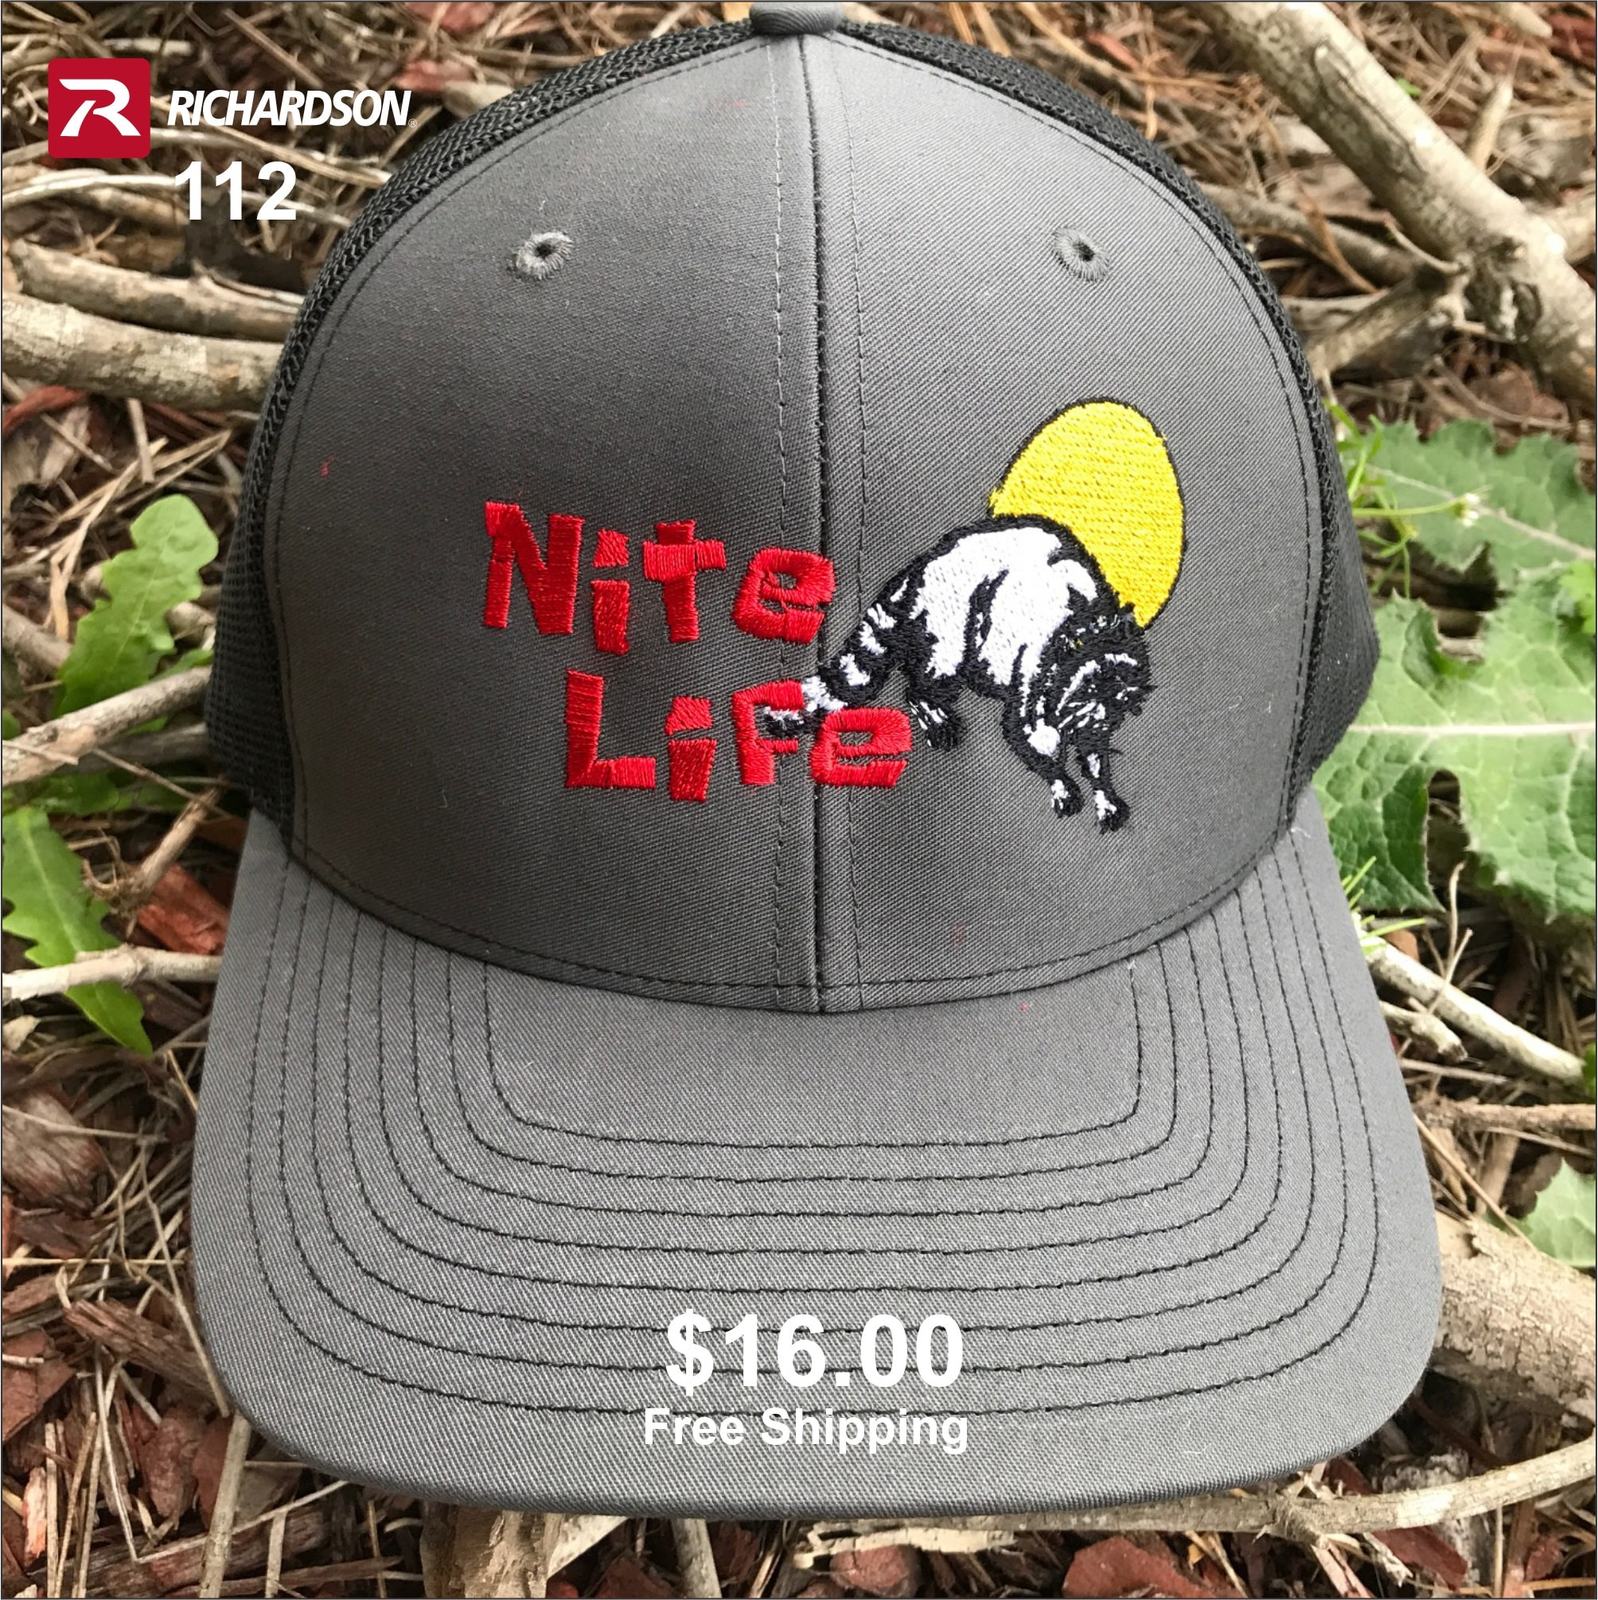 Primary image for Richardson 112 Embroidered Hats / Raccon Nite Life